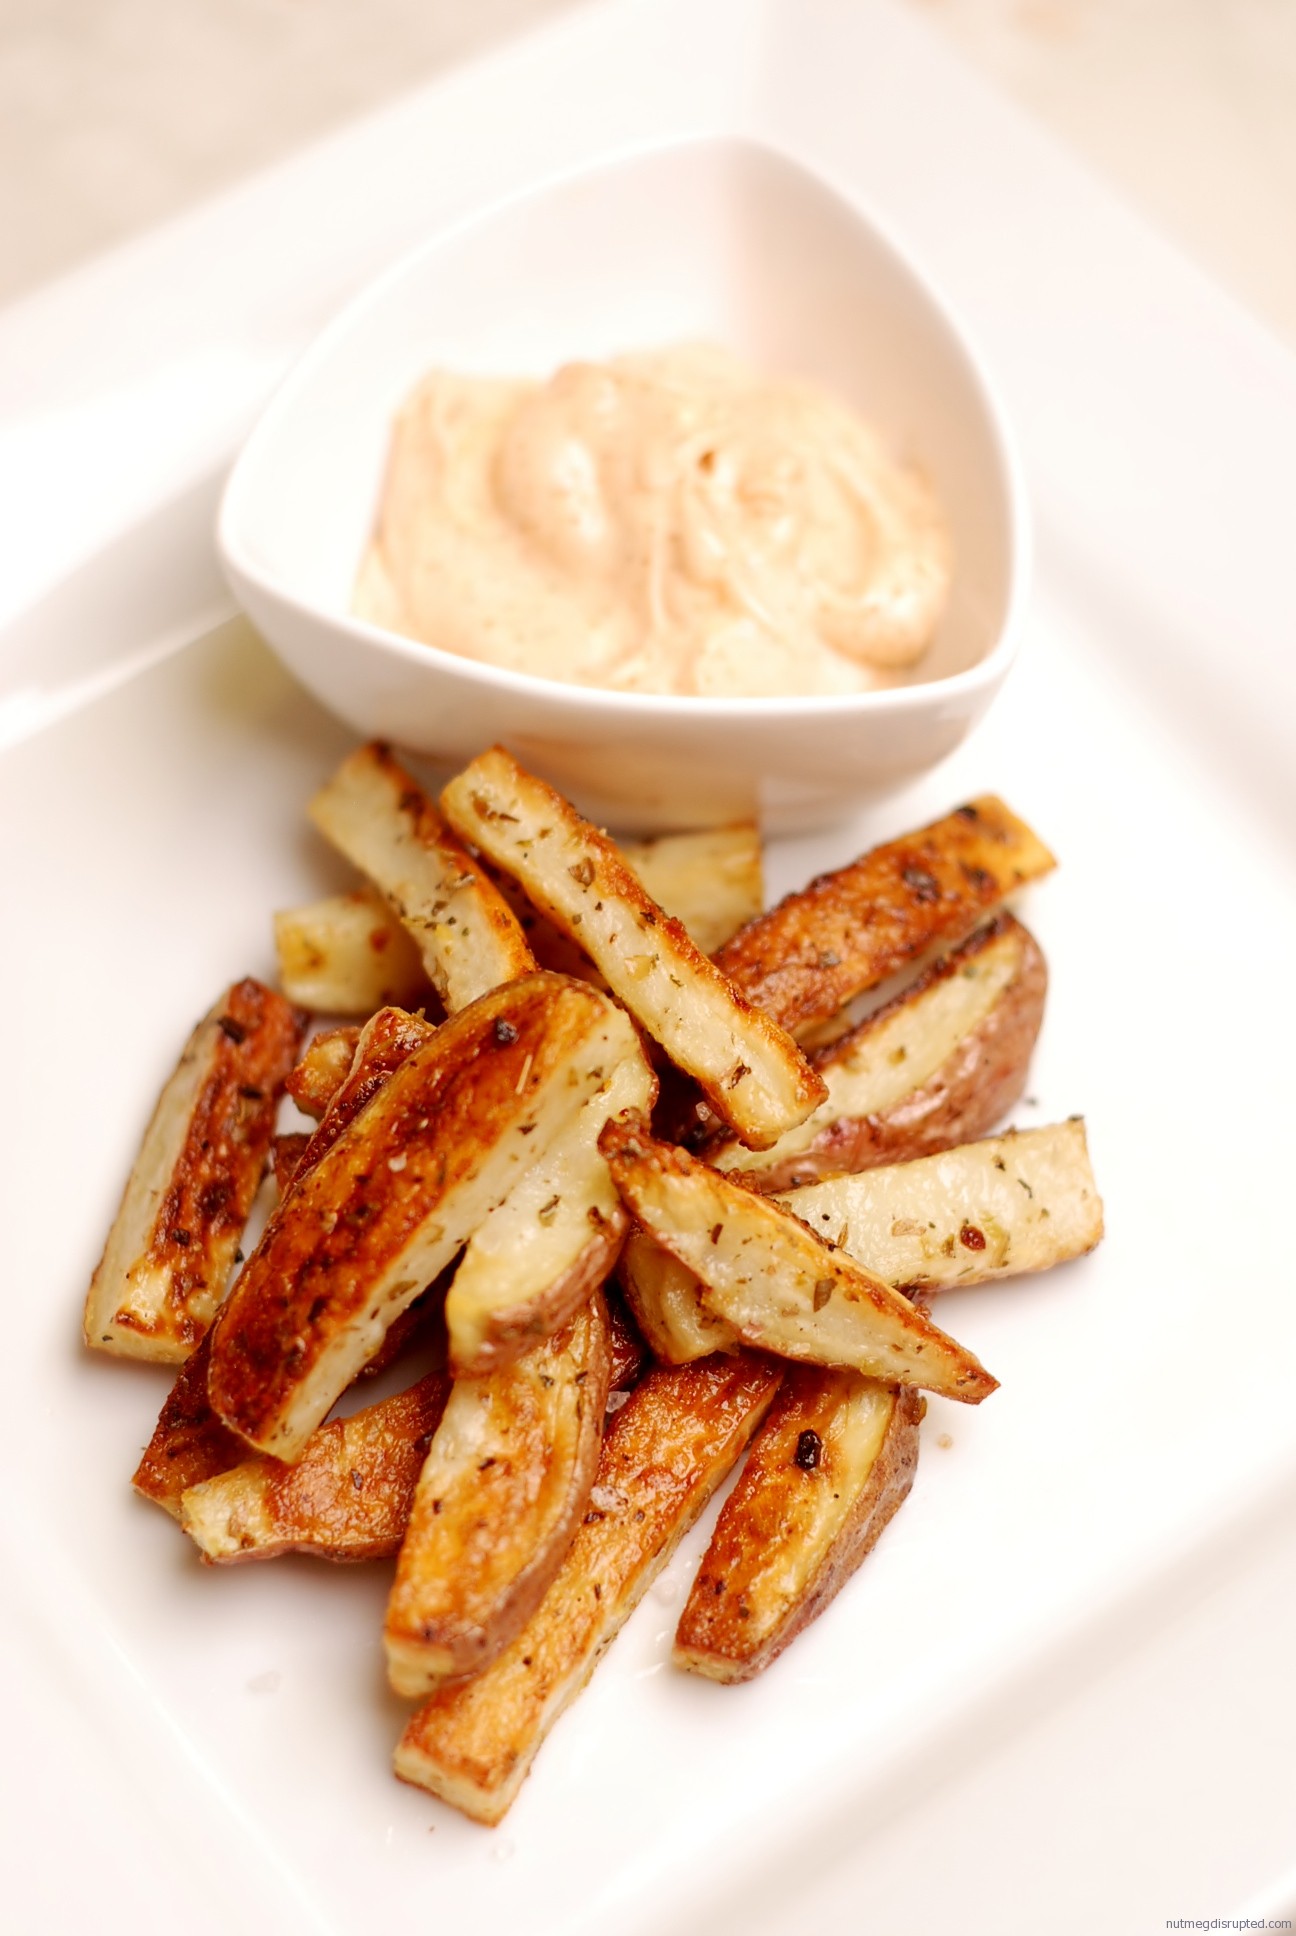 Oven Baked Fries with Spicy Chipotle Mayo